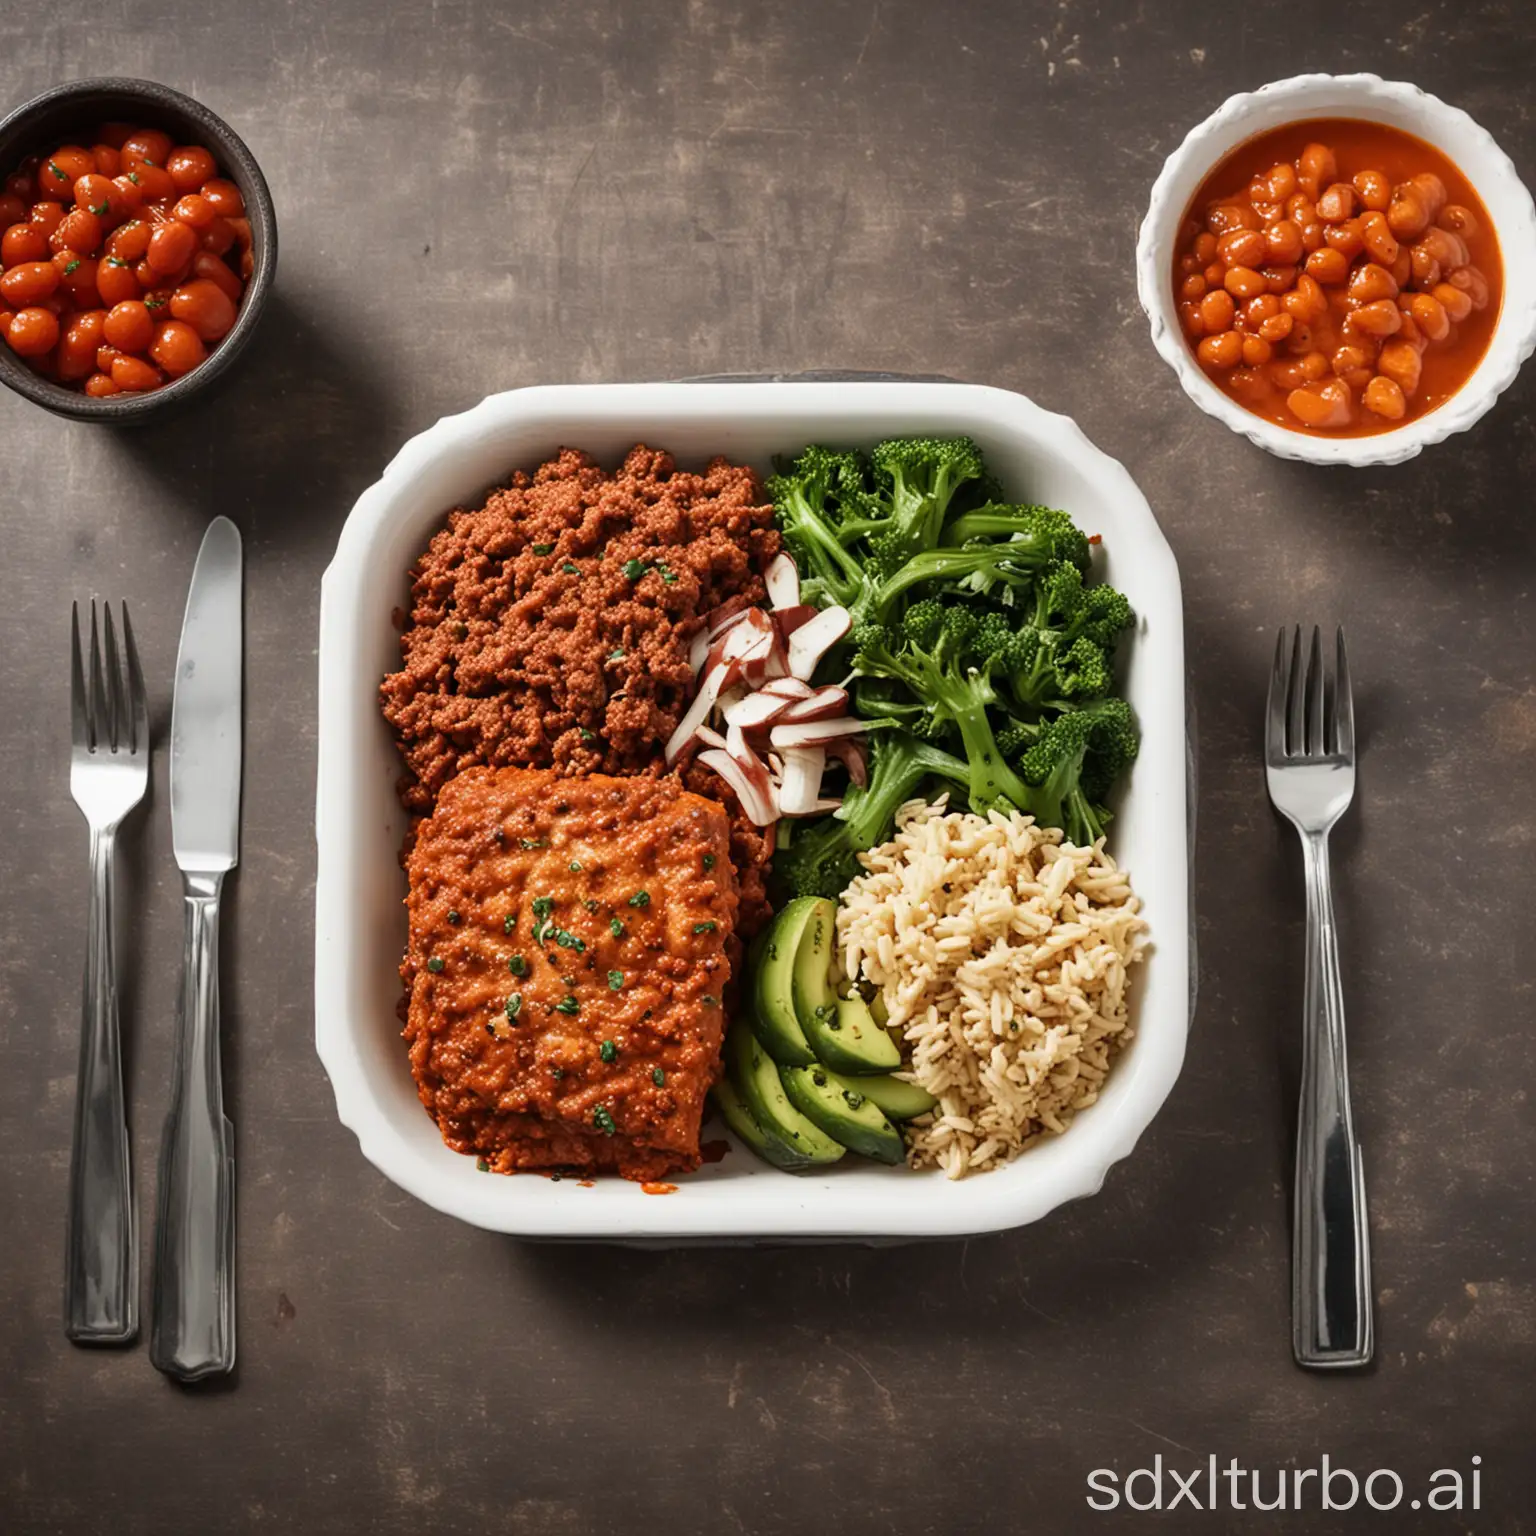 Wholesome-Vegan-Dinner-Savory-and-Satisfying-Meatless-Meal